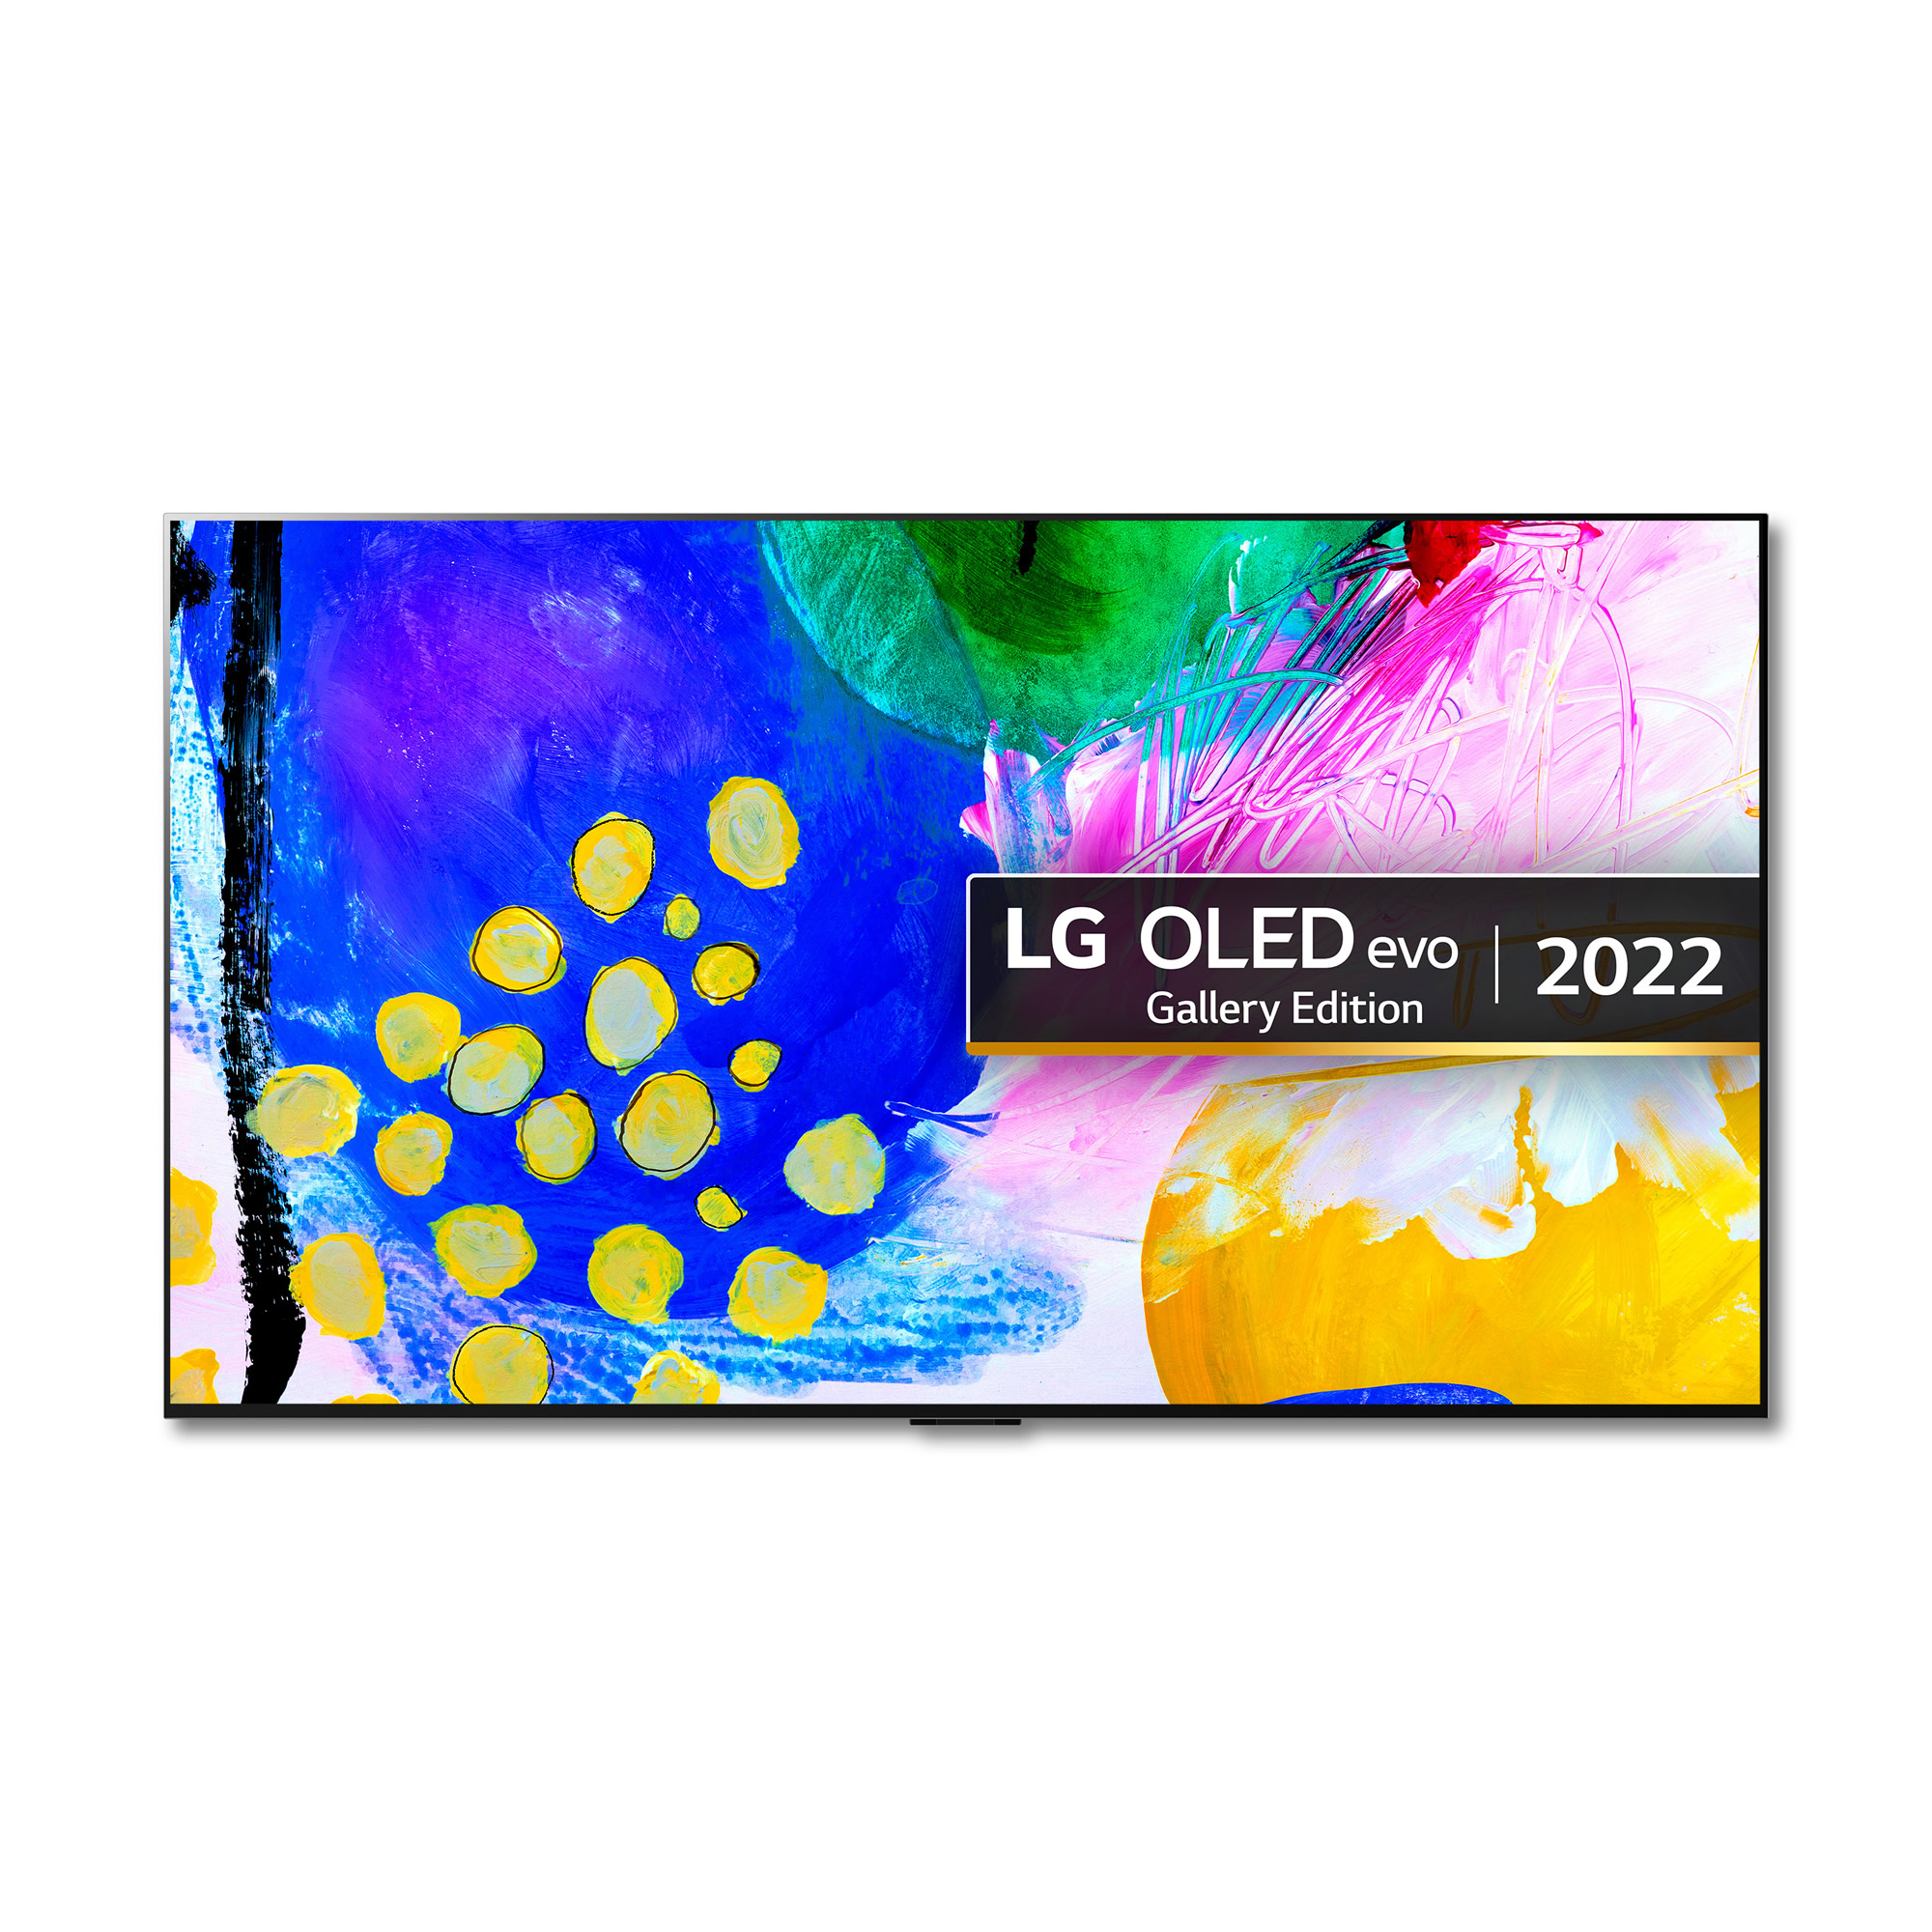 LG 55inch OLED HDR 4K UHD SMART TV WiFi Dolby Atmos